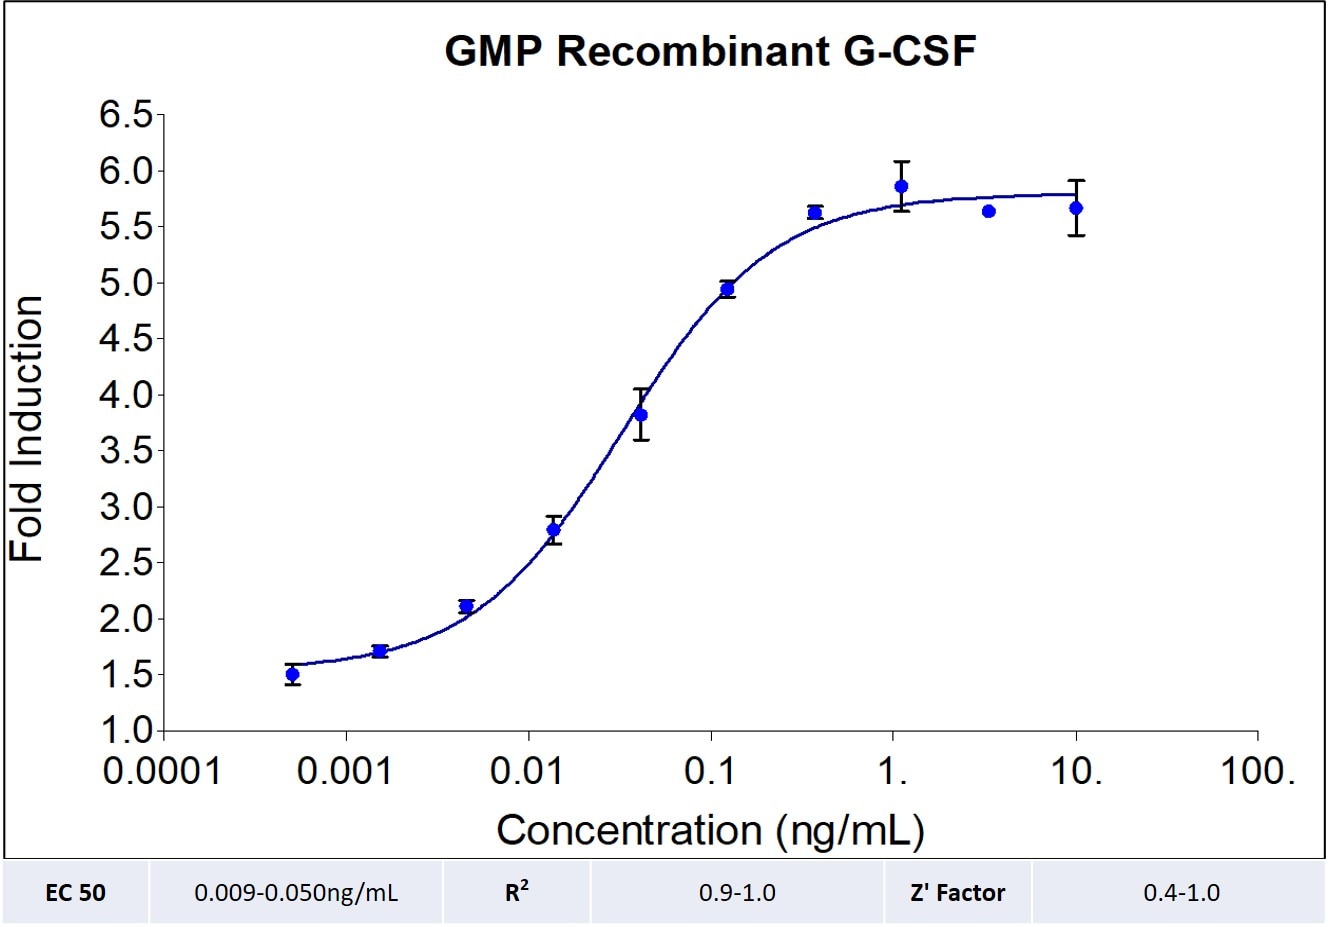 GMP-grade recombinant human G-CSF (HZ-1207-GMP) Stimulates dose-dependent proliferation of the M-NFS-60 Mouse Myeloid Leukemia indicator cells line. Viable cell number was quantitiatively assessed by PrestoBlue Cell Viability Reagent. M-NFS-60 cells were treated with increasing concentrations of recombinant human G-CSF for 72 hours. The EC50 was determined using a 4- parameter non-linear regression model. Activity determination was conducted in triplicate on a validated bioassay. The EC50 values range from 0.009-0.05 ng/mL.  